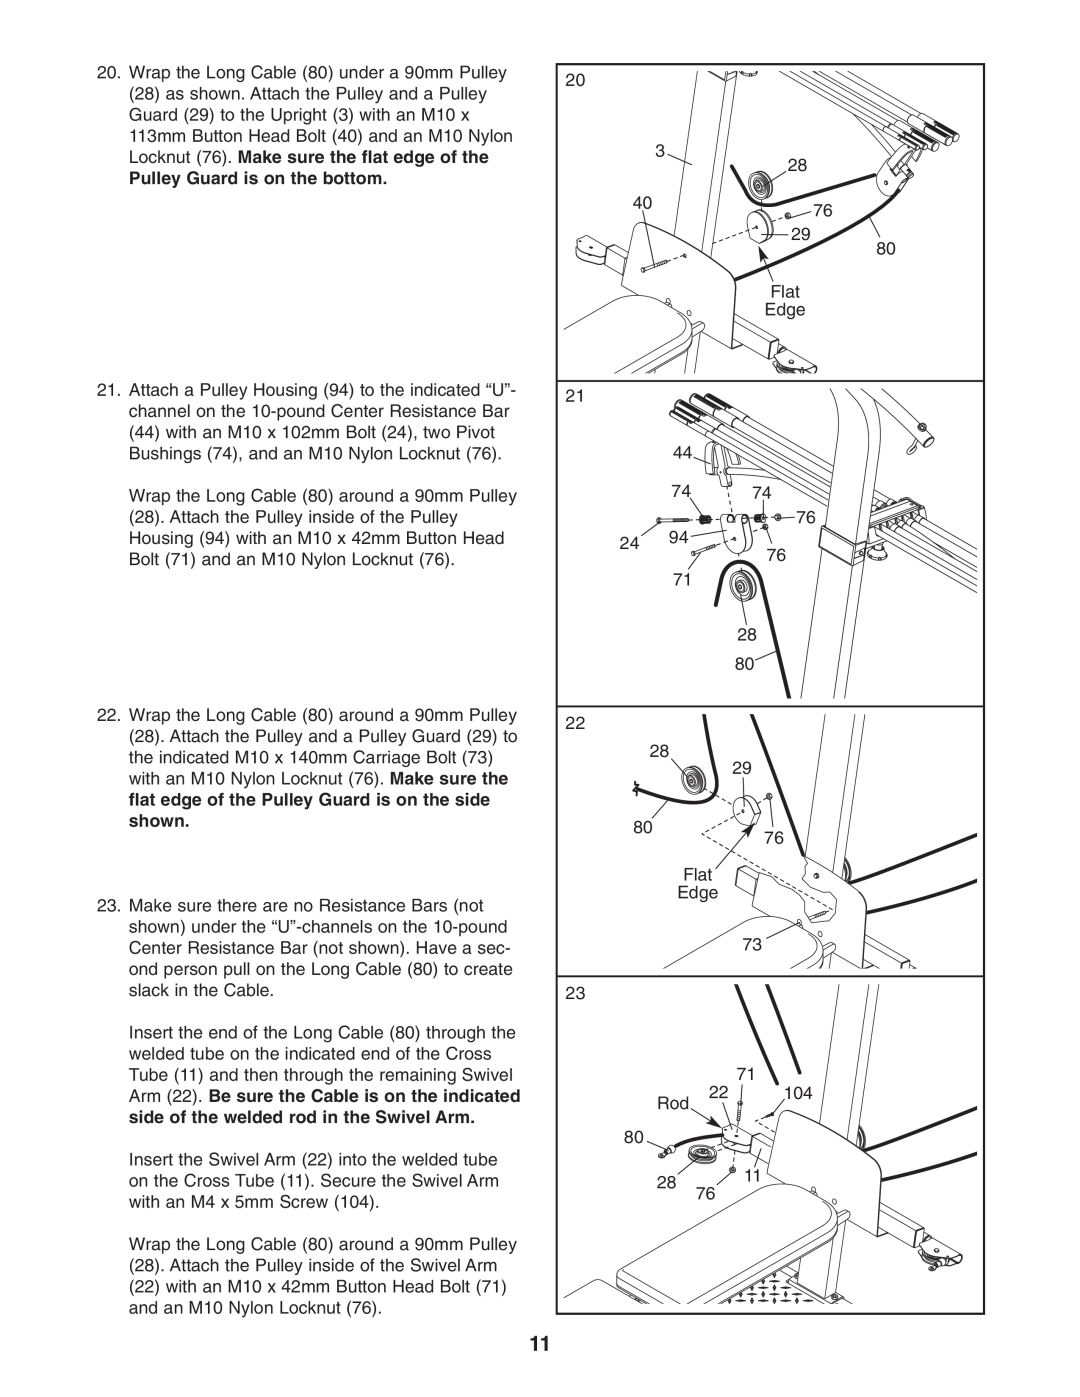 Weider WESY5983.5 user manual Locknut 76. Make sure the flat edge of the, Pulley Guard is on the bottom, shown 